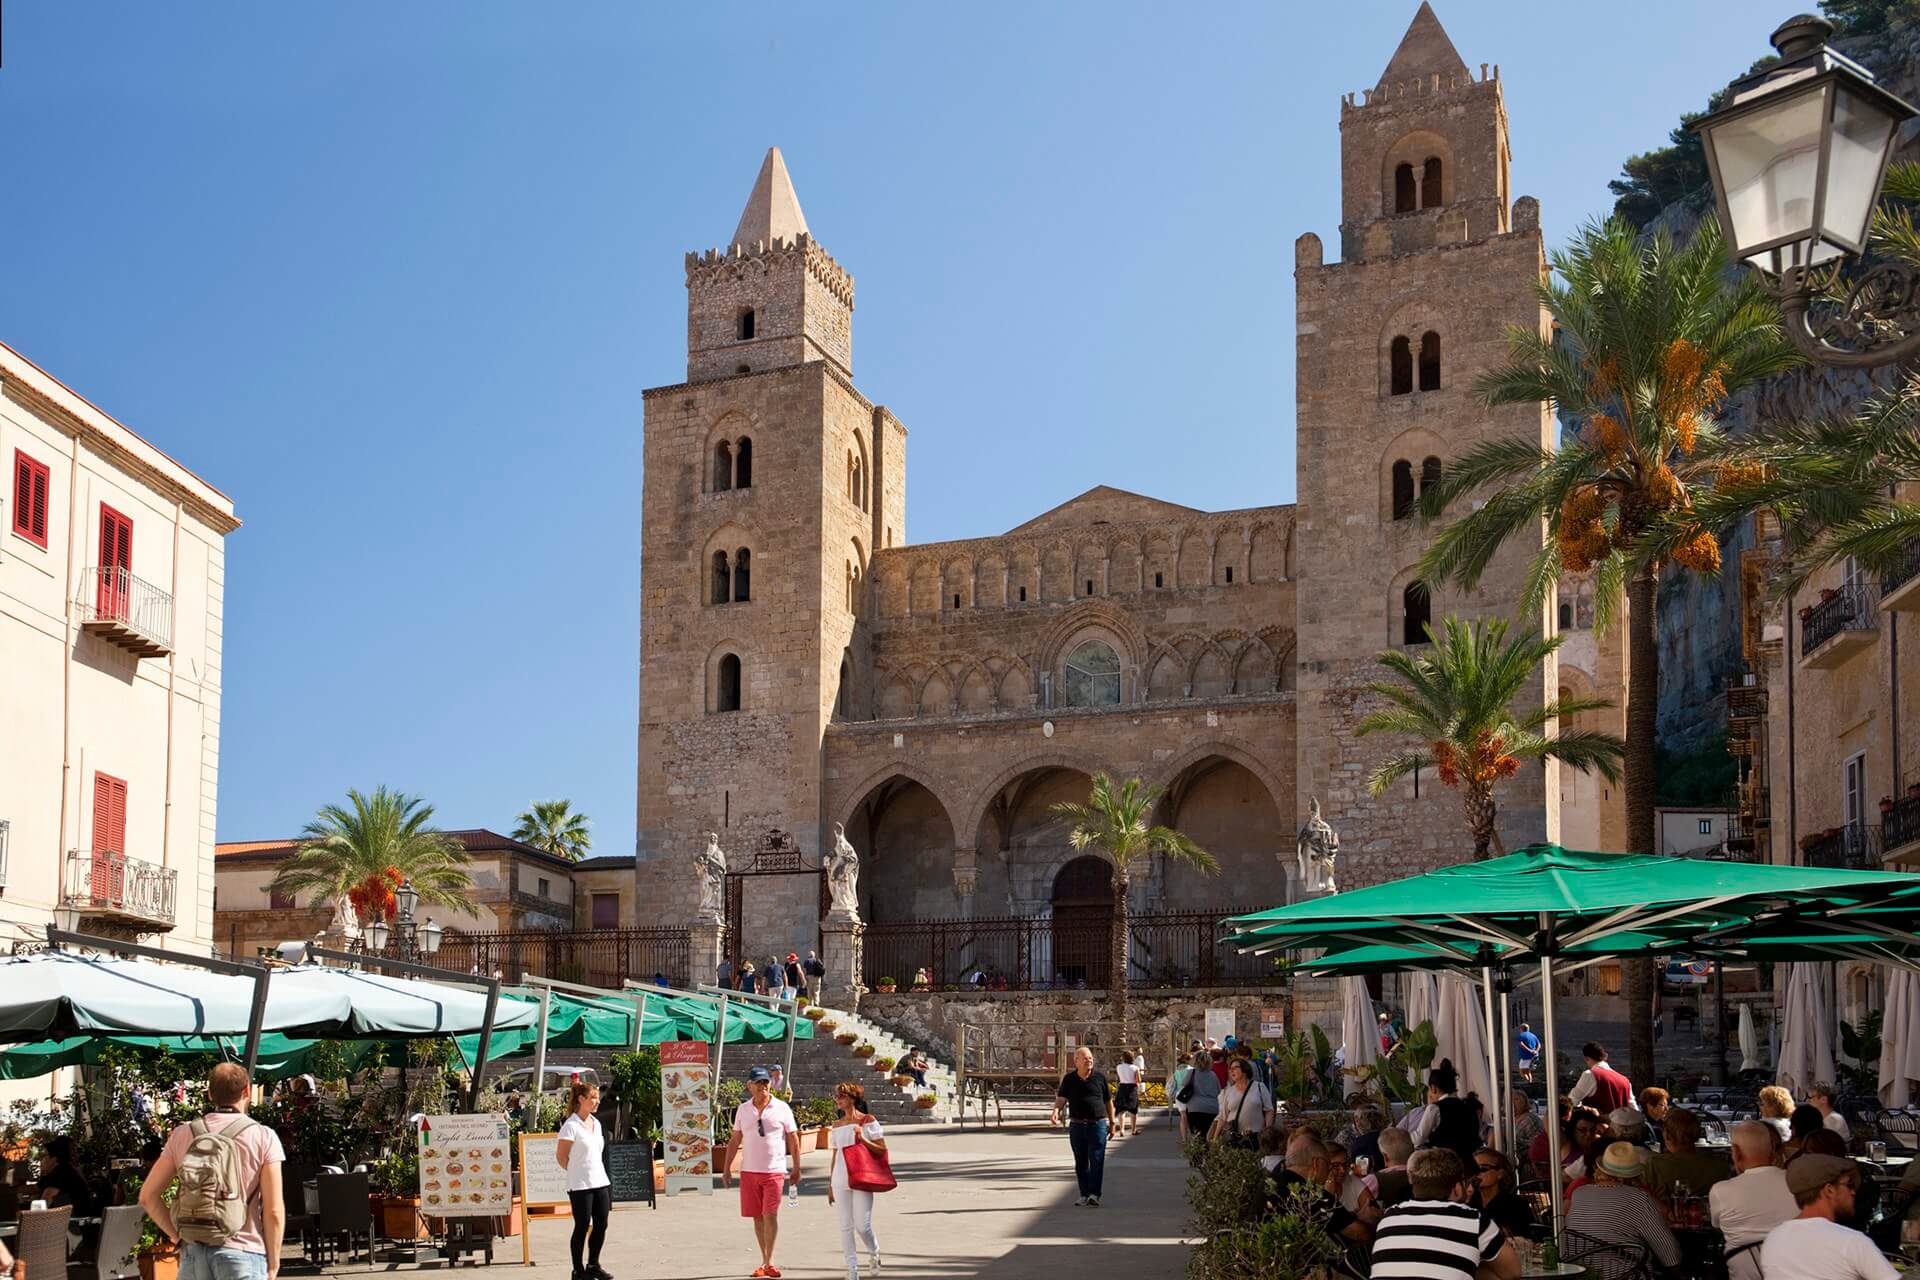 Things to do in Cefalu